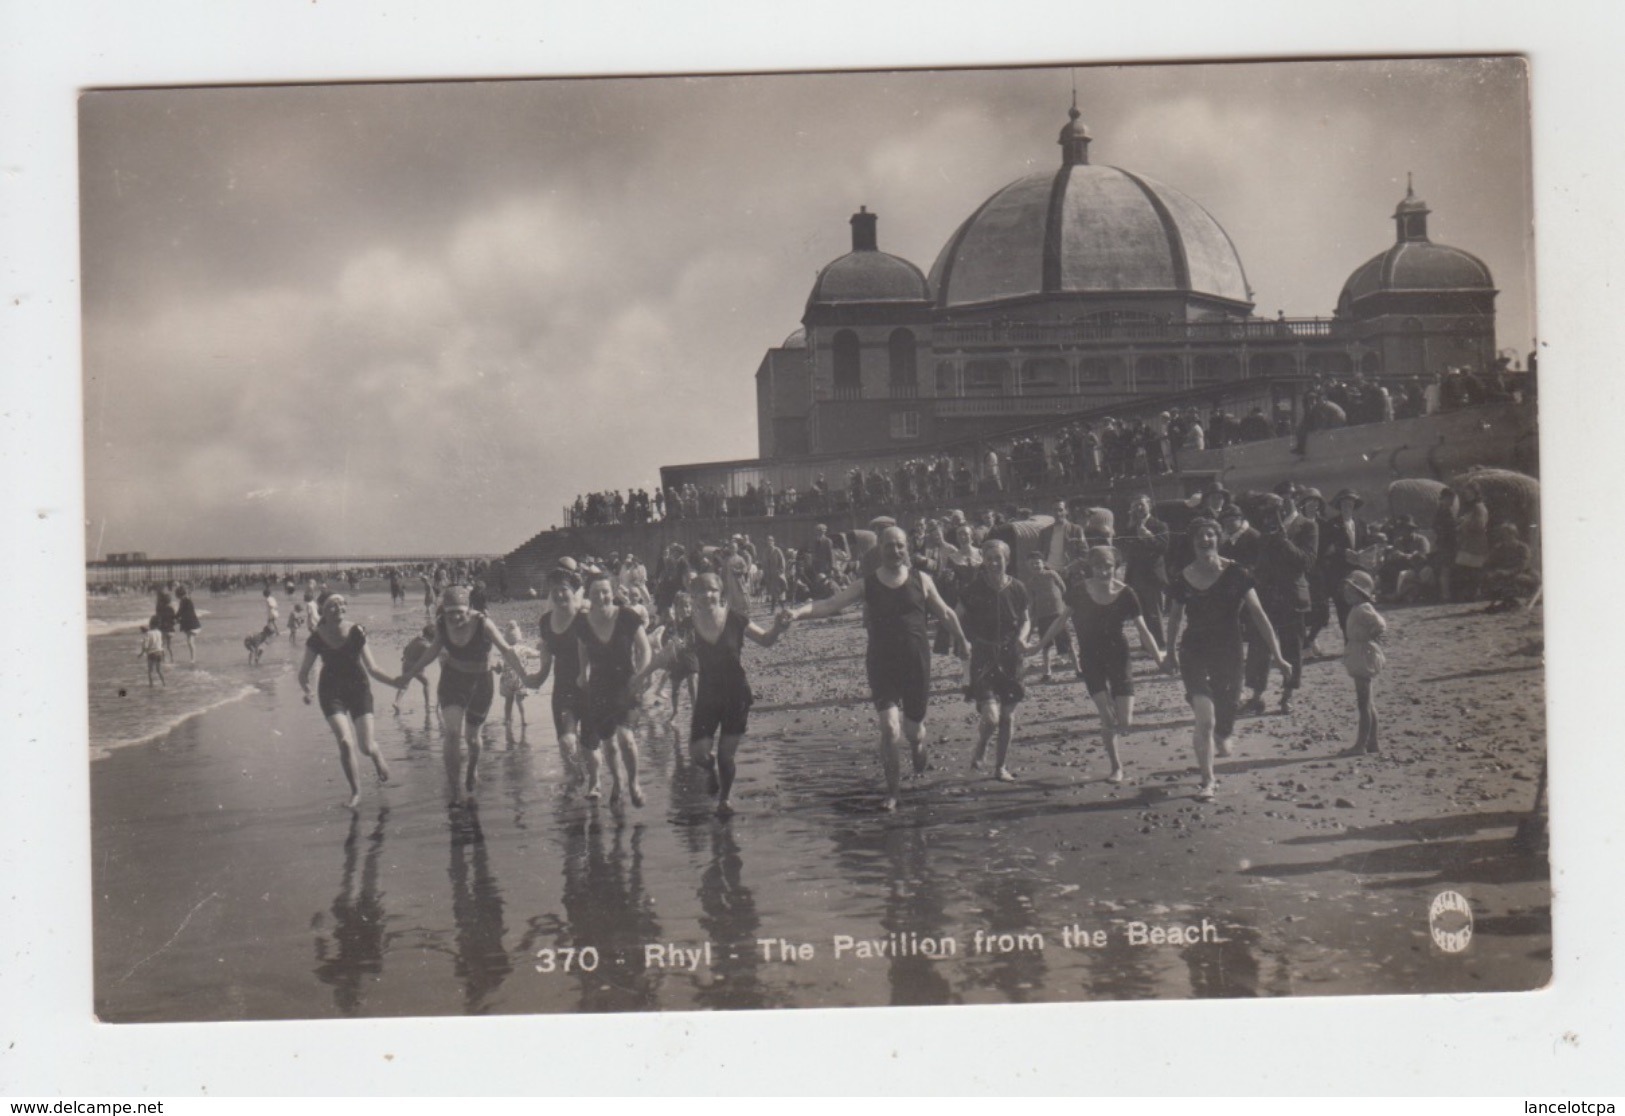 WALES - RHYL / THE PAVILION FROM THE BEACH - REAL PHOTO     475061139 - Denbighshire